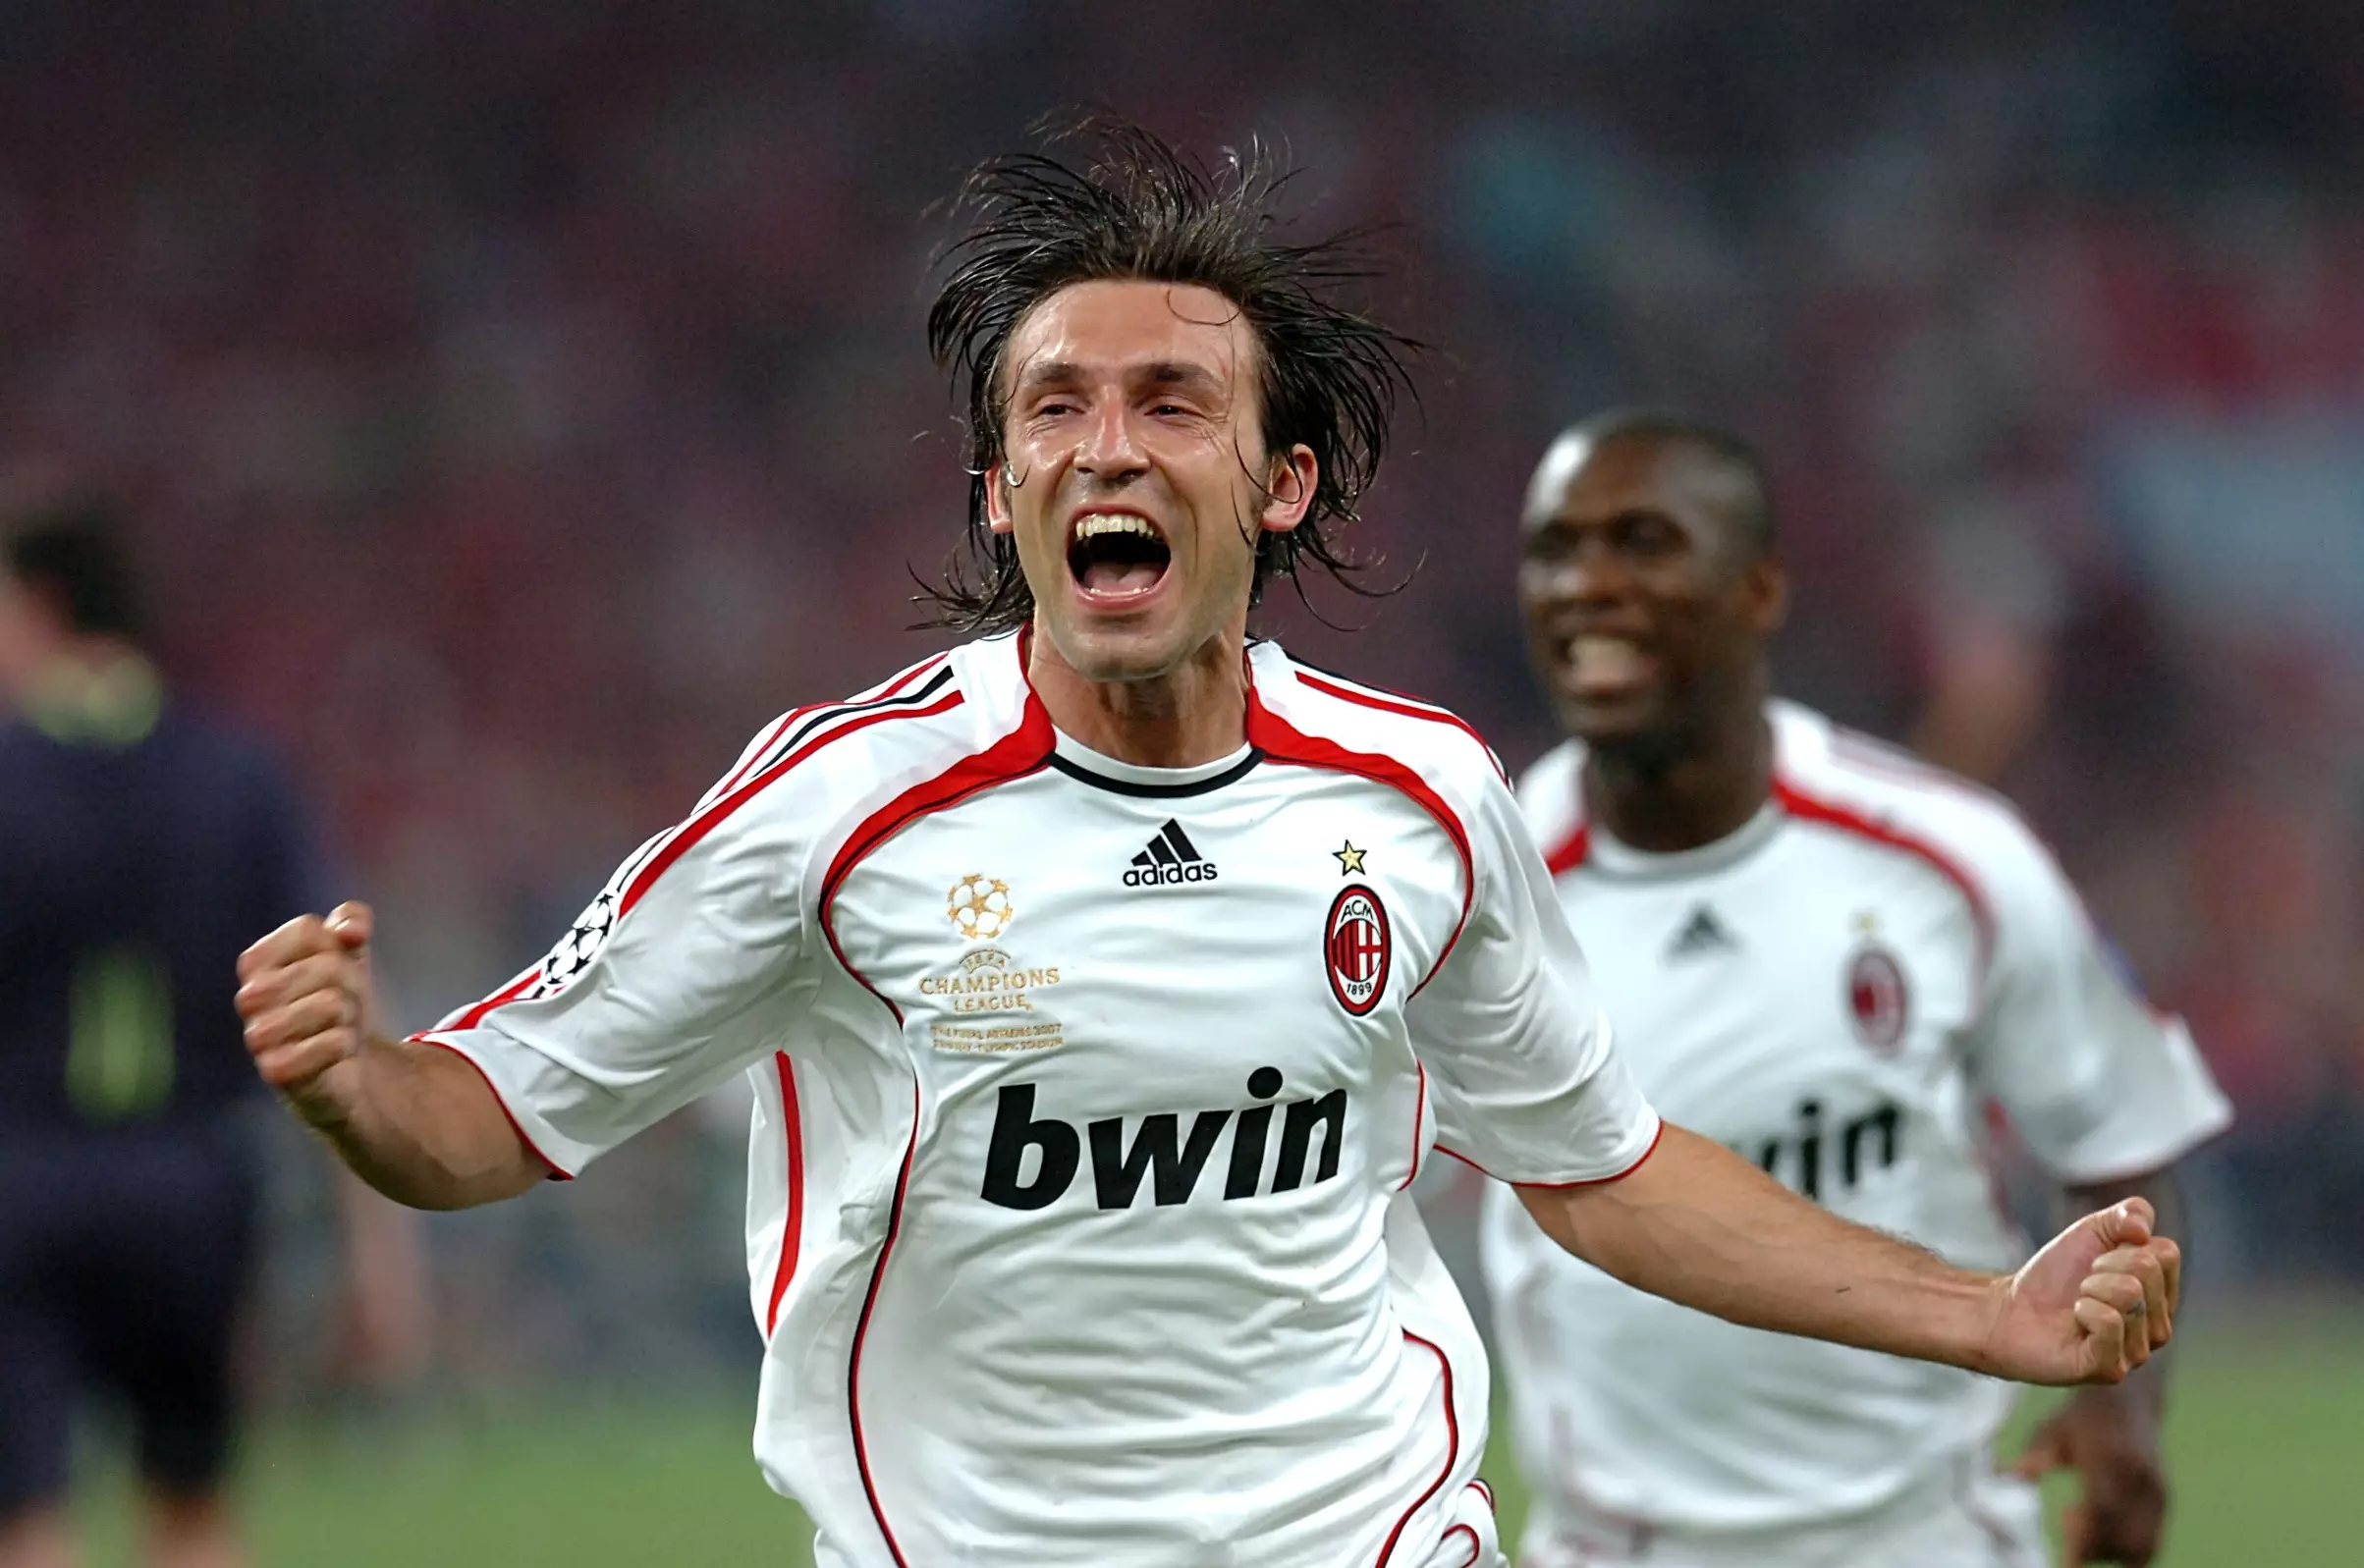 Many of Pirlo's best moments came in a Milan shirt, and he also played for Inter. Image: PA Images.